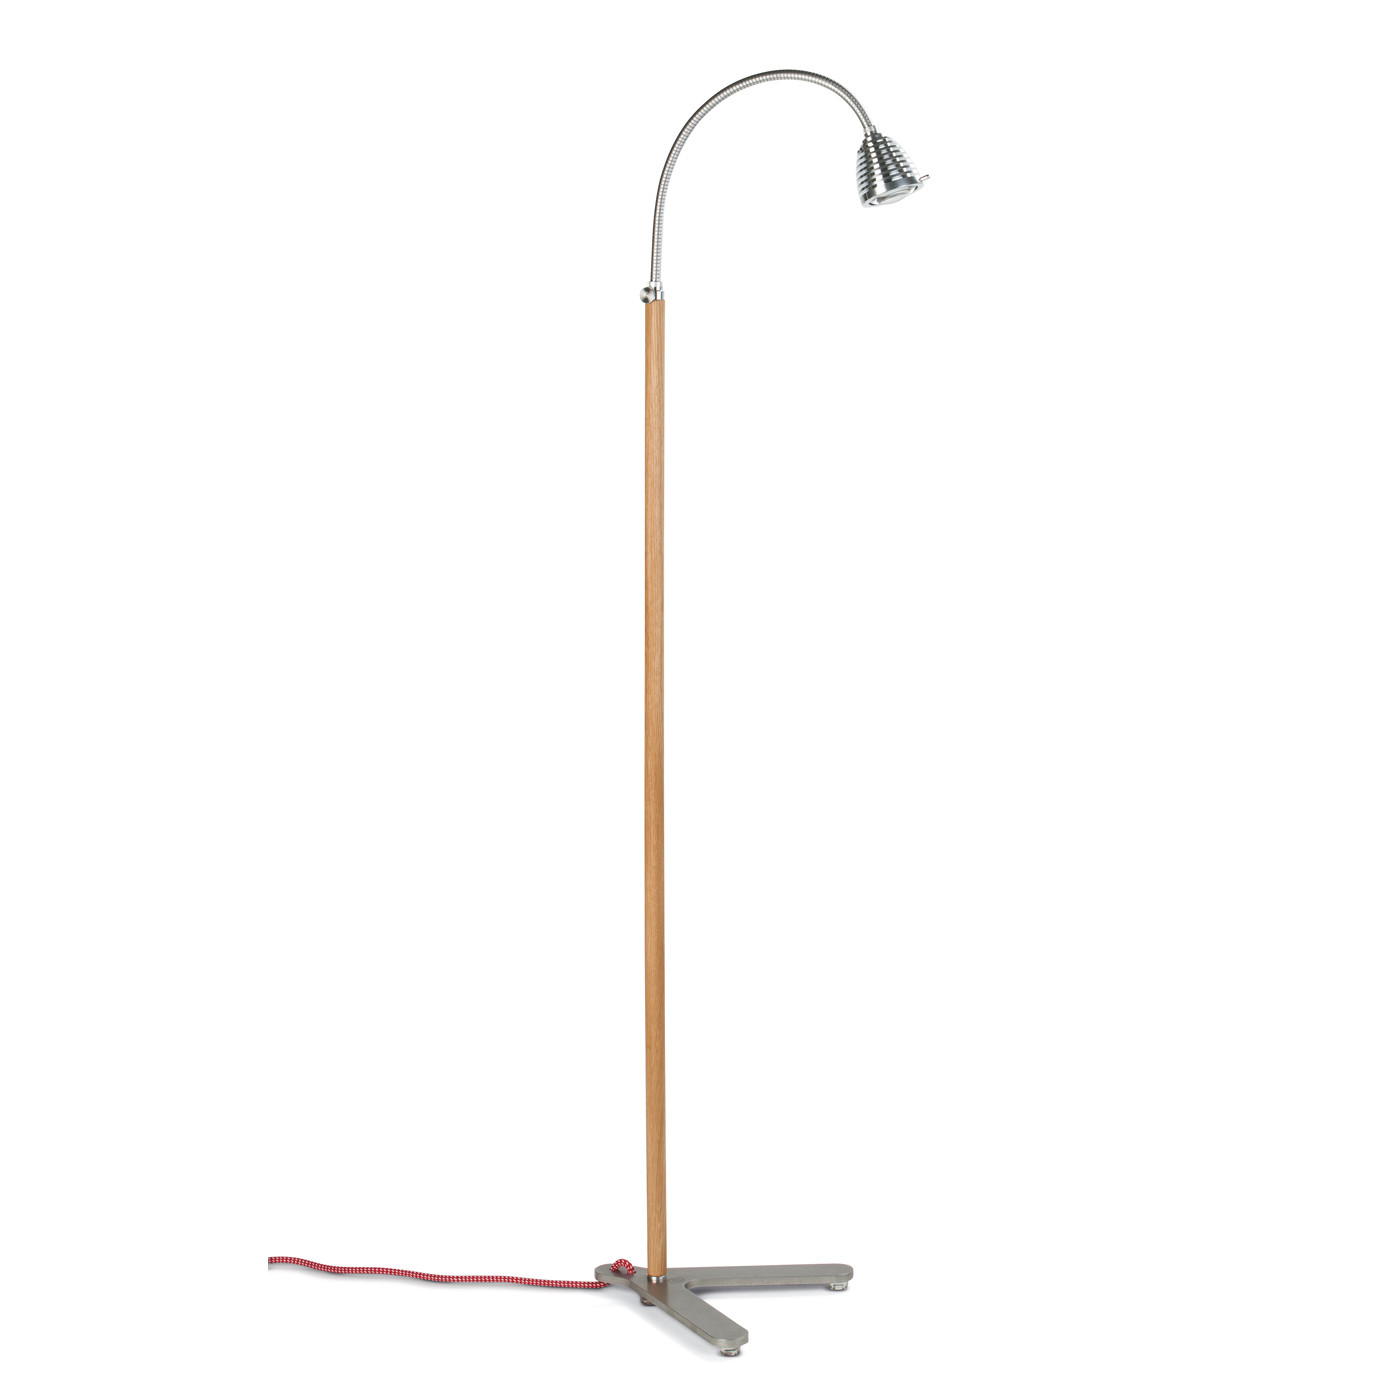 Less N More Athene A Hsl Floor Lamp At Nostraforma